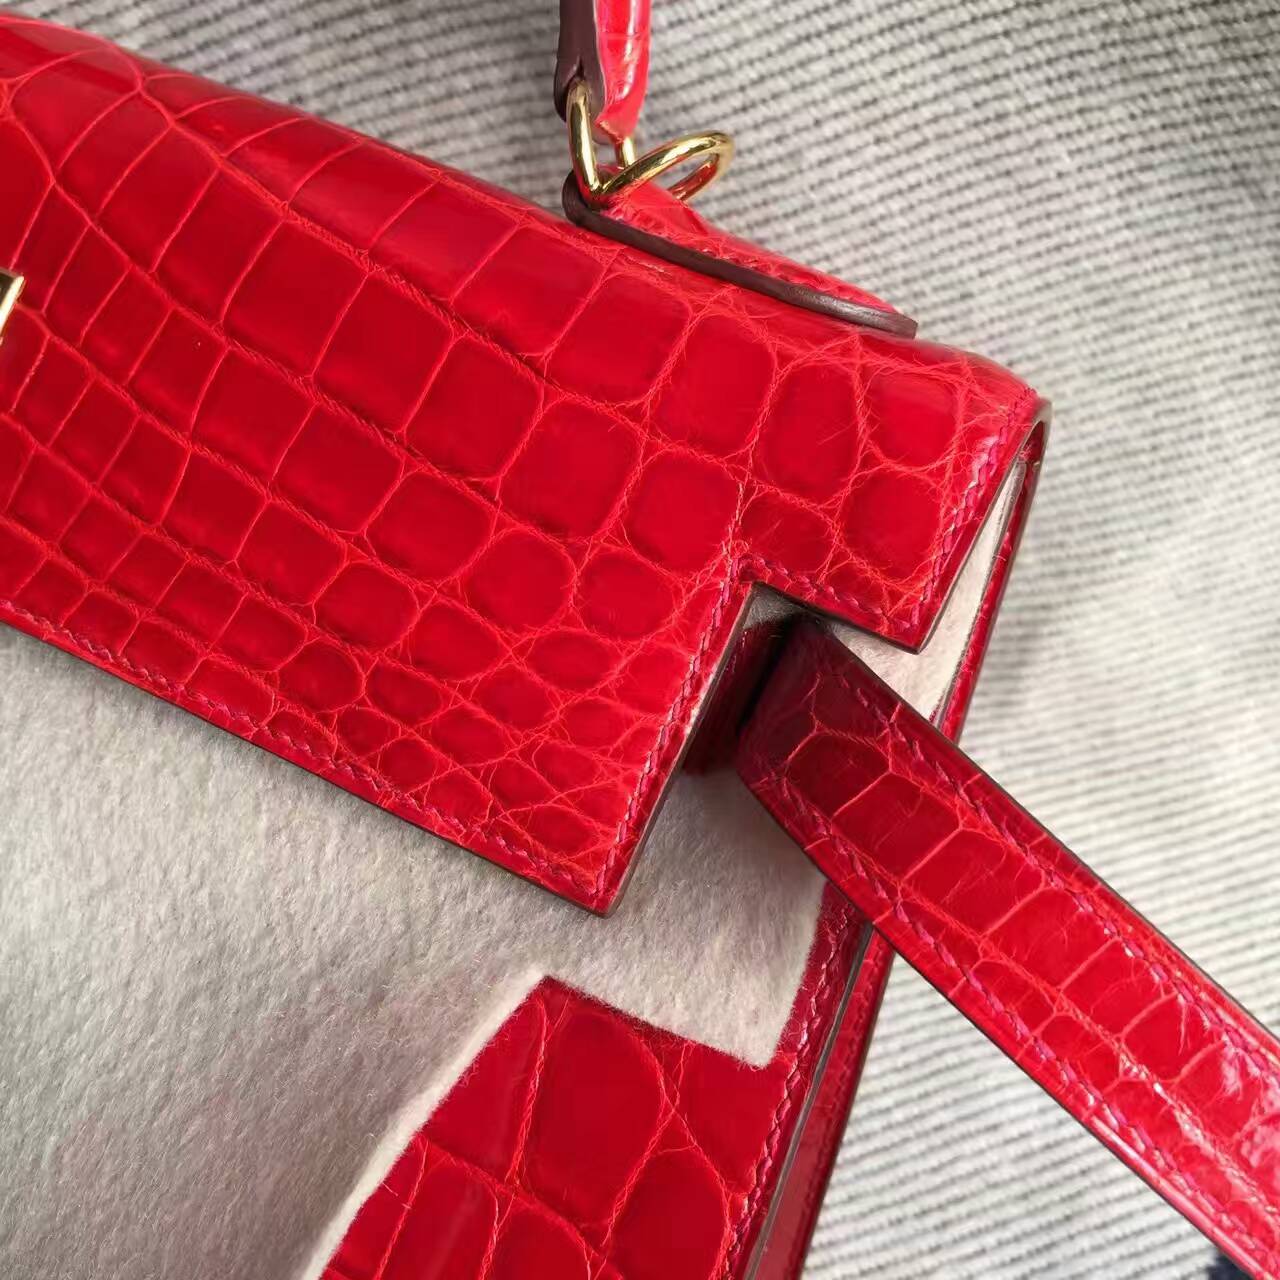 Hand Stitching Hermes Crocodile Shiny Leather Kelly Bag 32CM in CK95 Braise